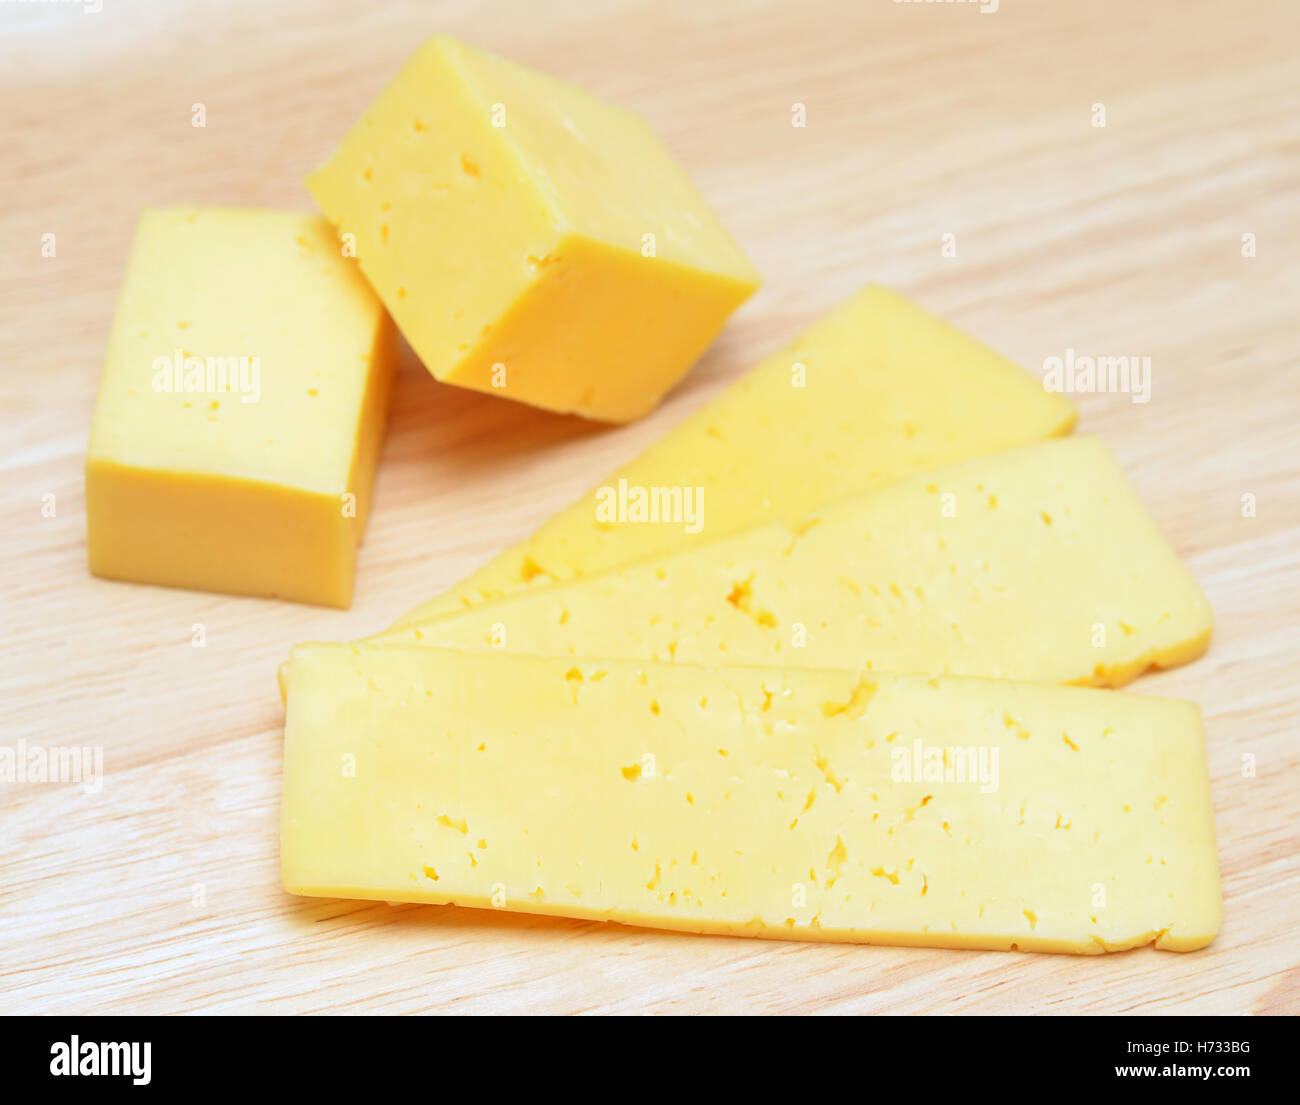 cheese slices on wooden background Stock Photo